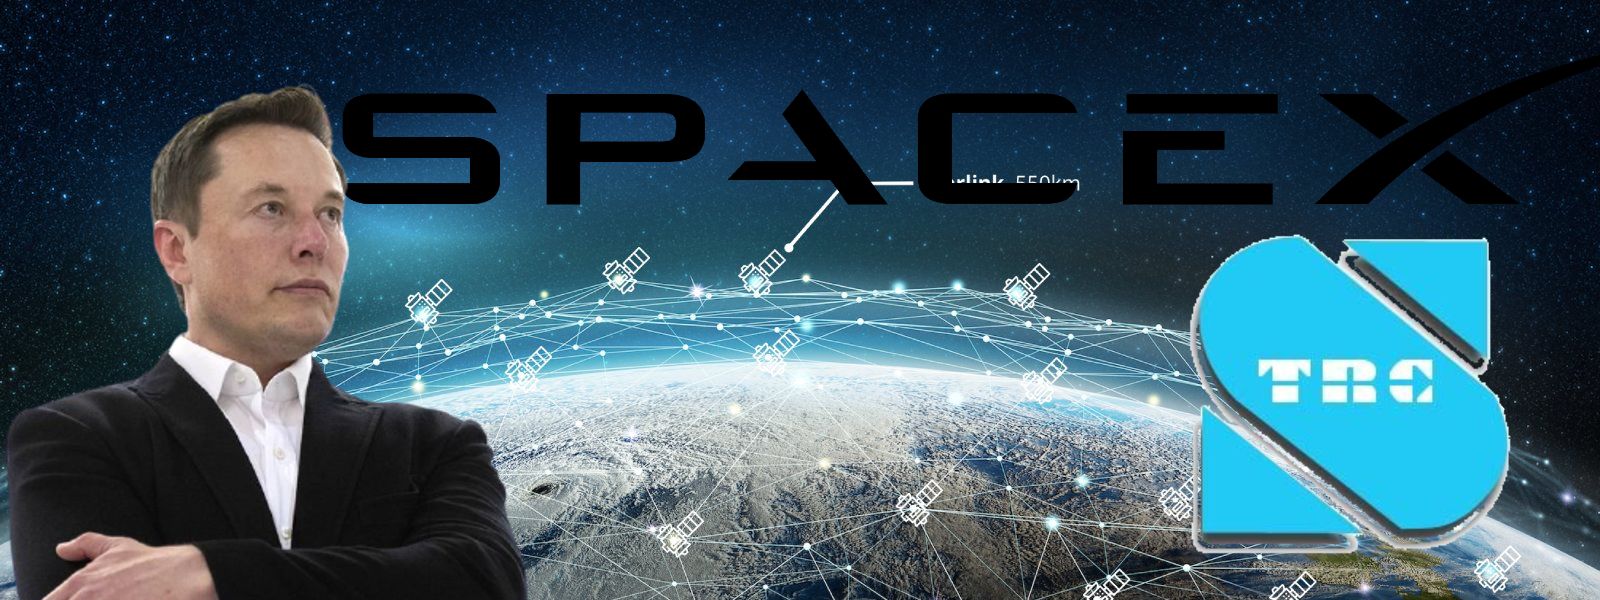 Sri Lanka in talks with SpaceX for world’s most advanced broadband internet system